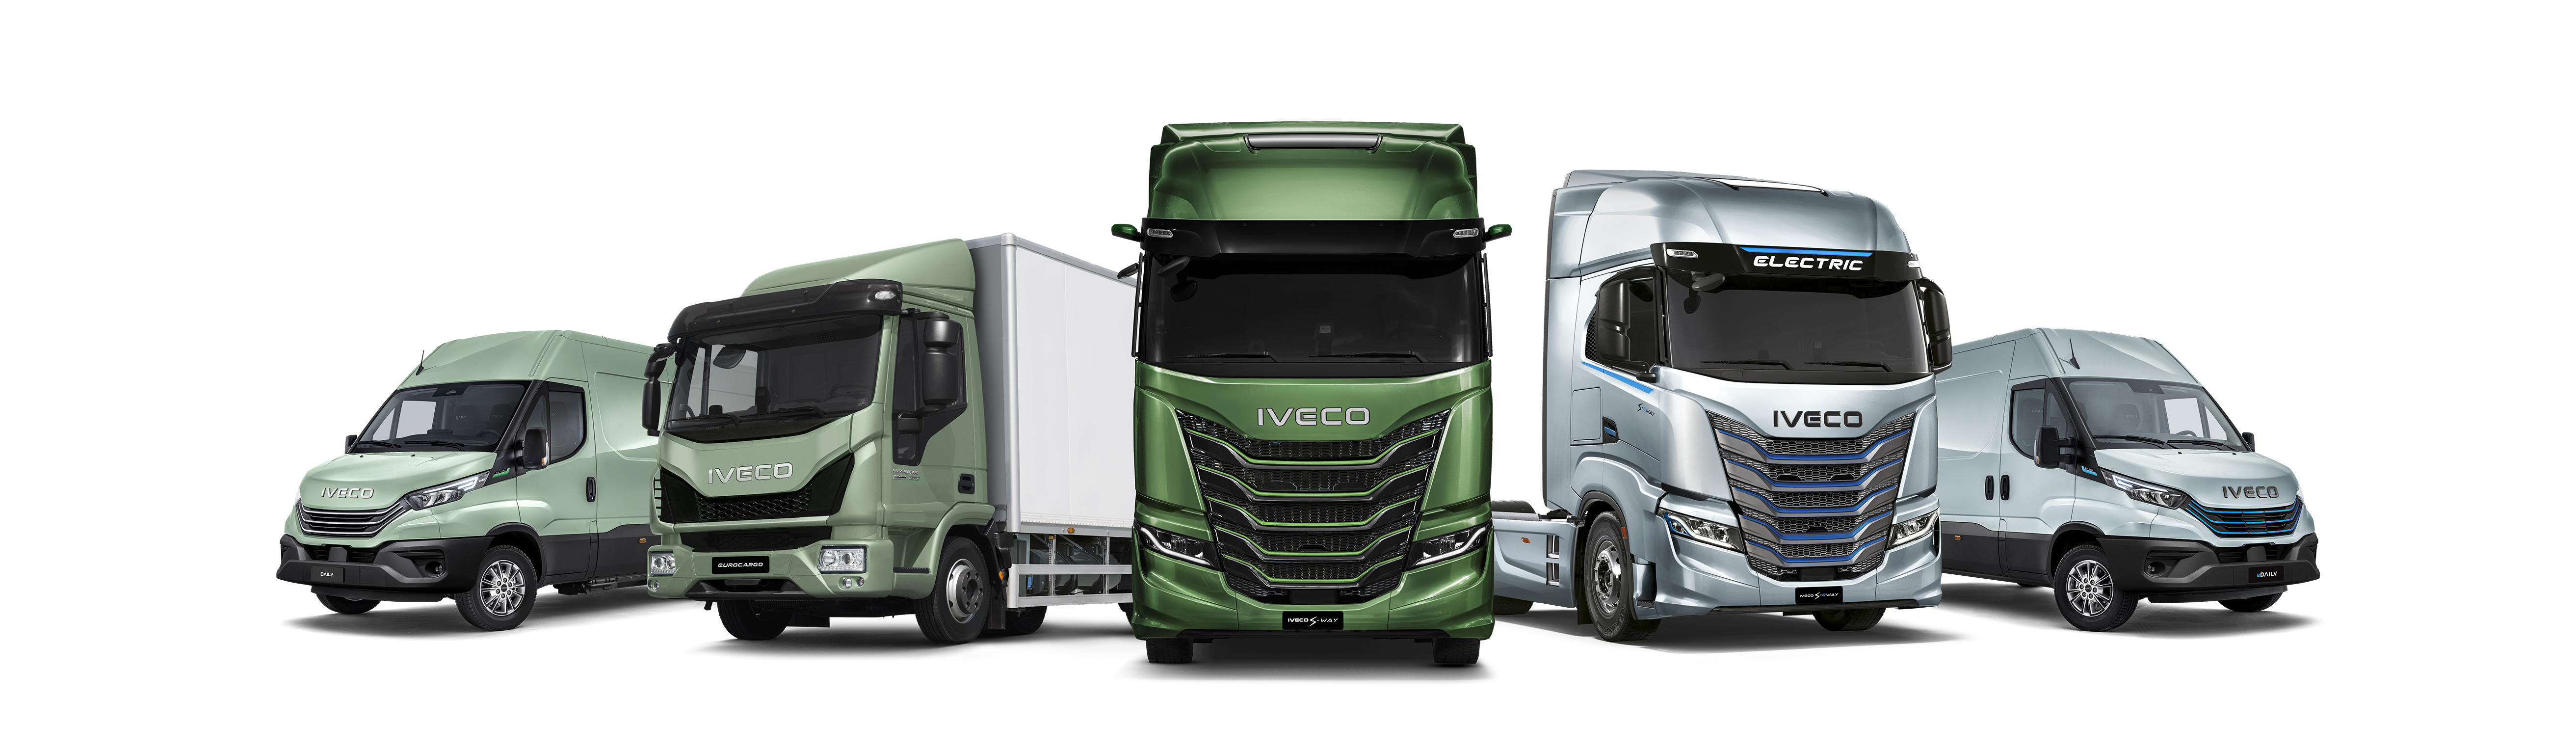 Véhicules neufs Iveco - Nouvelle gamme